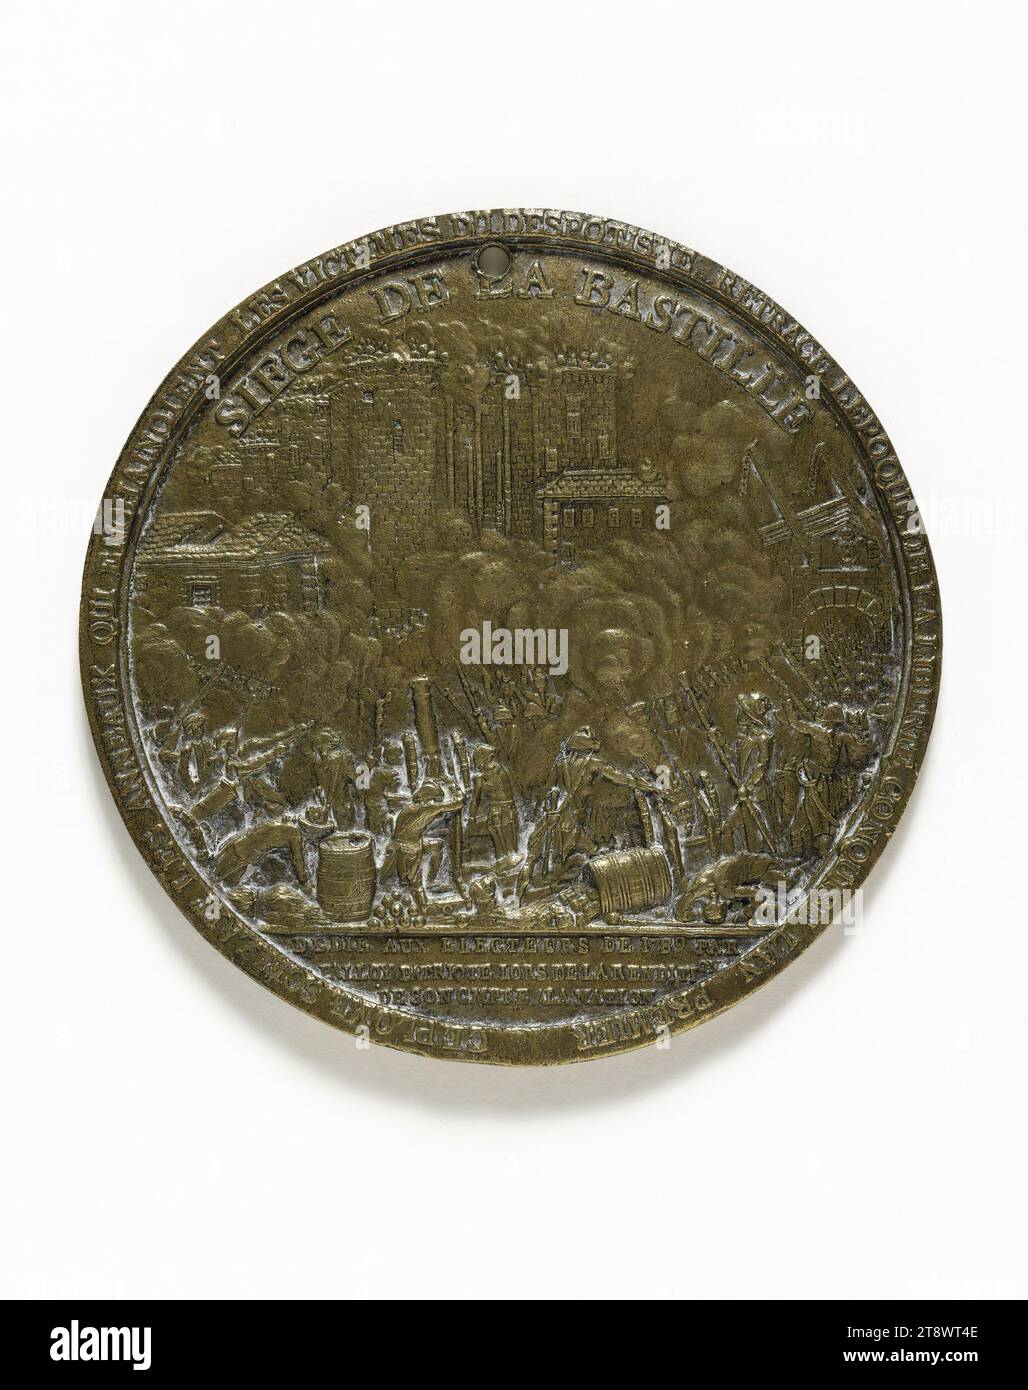 Siege of the Bastille, July 14, 1789, Anonymous, Array, Numismatics, Medal, Dimensions - Work: Diameter: 7.8 cm, Weight (type dimension): 95.6 g Stock Photo